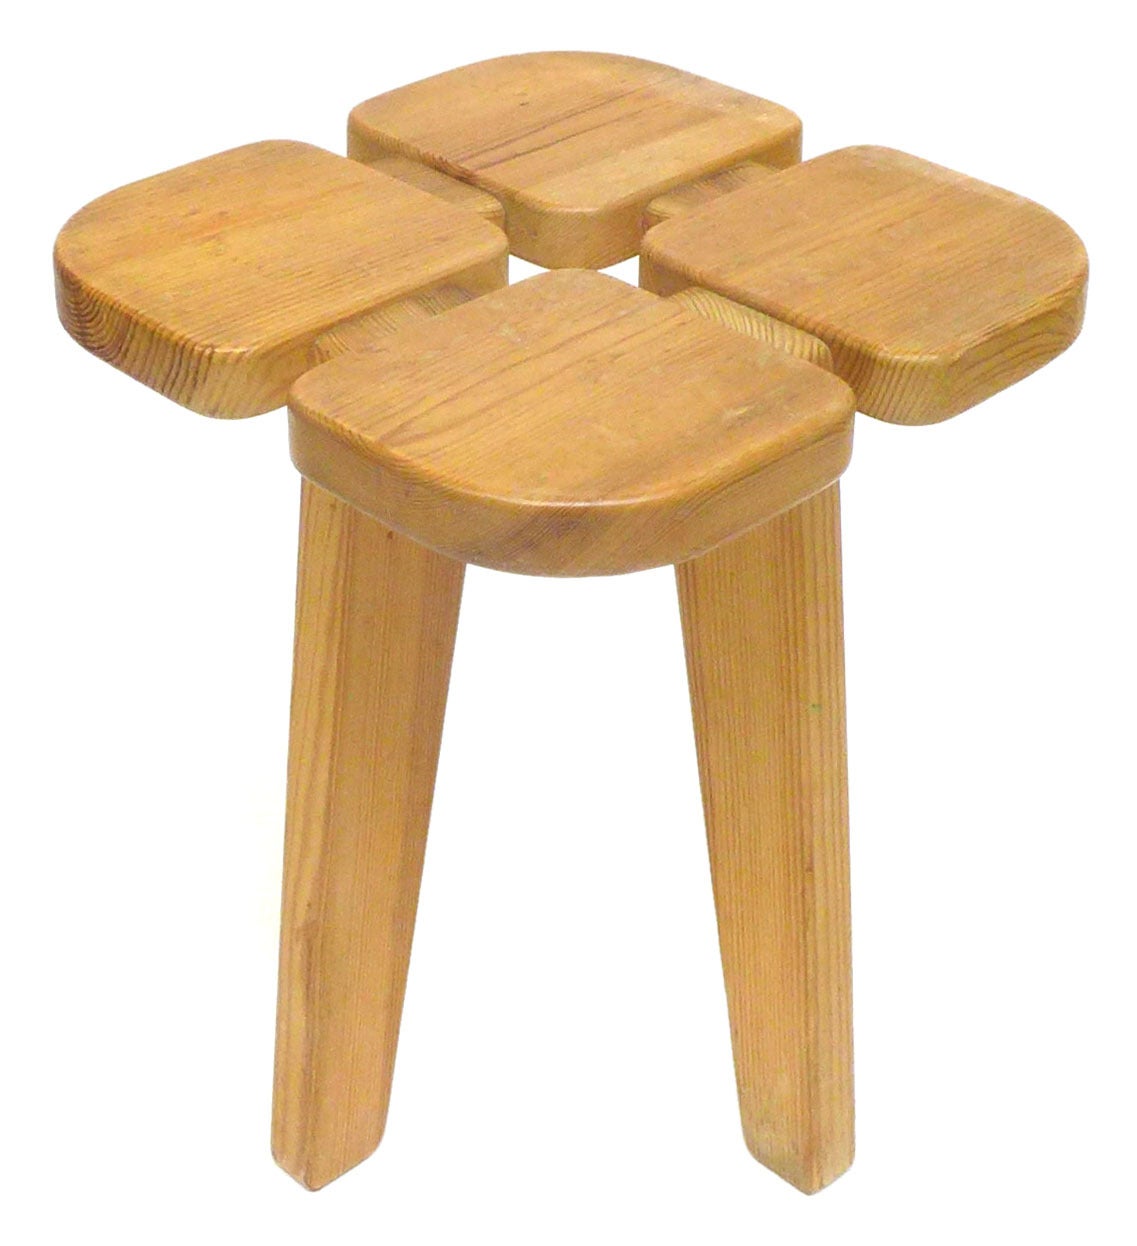 A lovely wood stool by Finnish designer Lisa Johansson-Pape (1907-1989) for Stockmann AB.  Though best known for her graceful, mid-century lighting, Johansson-Pape was also a talented designer in other fields.  A simple and beautiful piece of